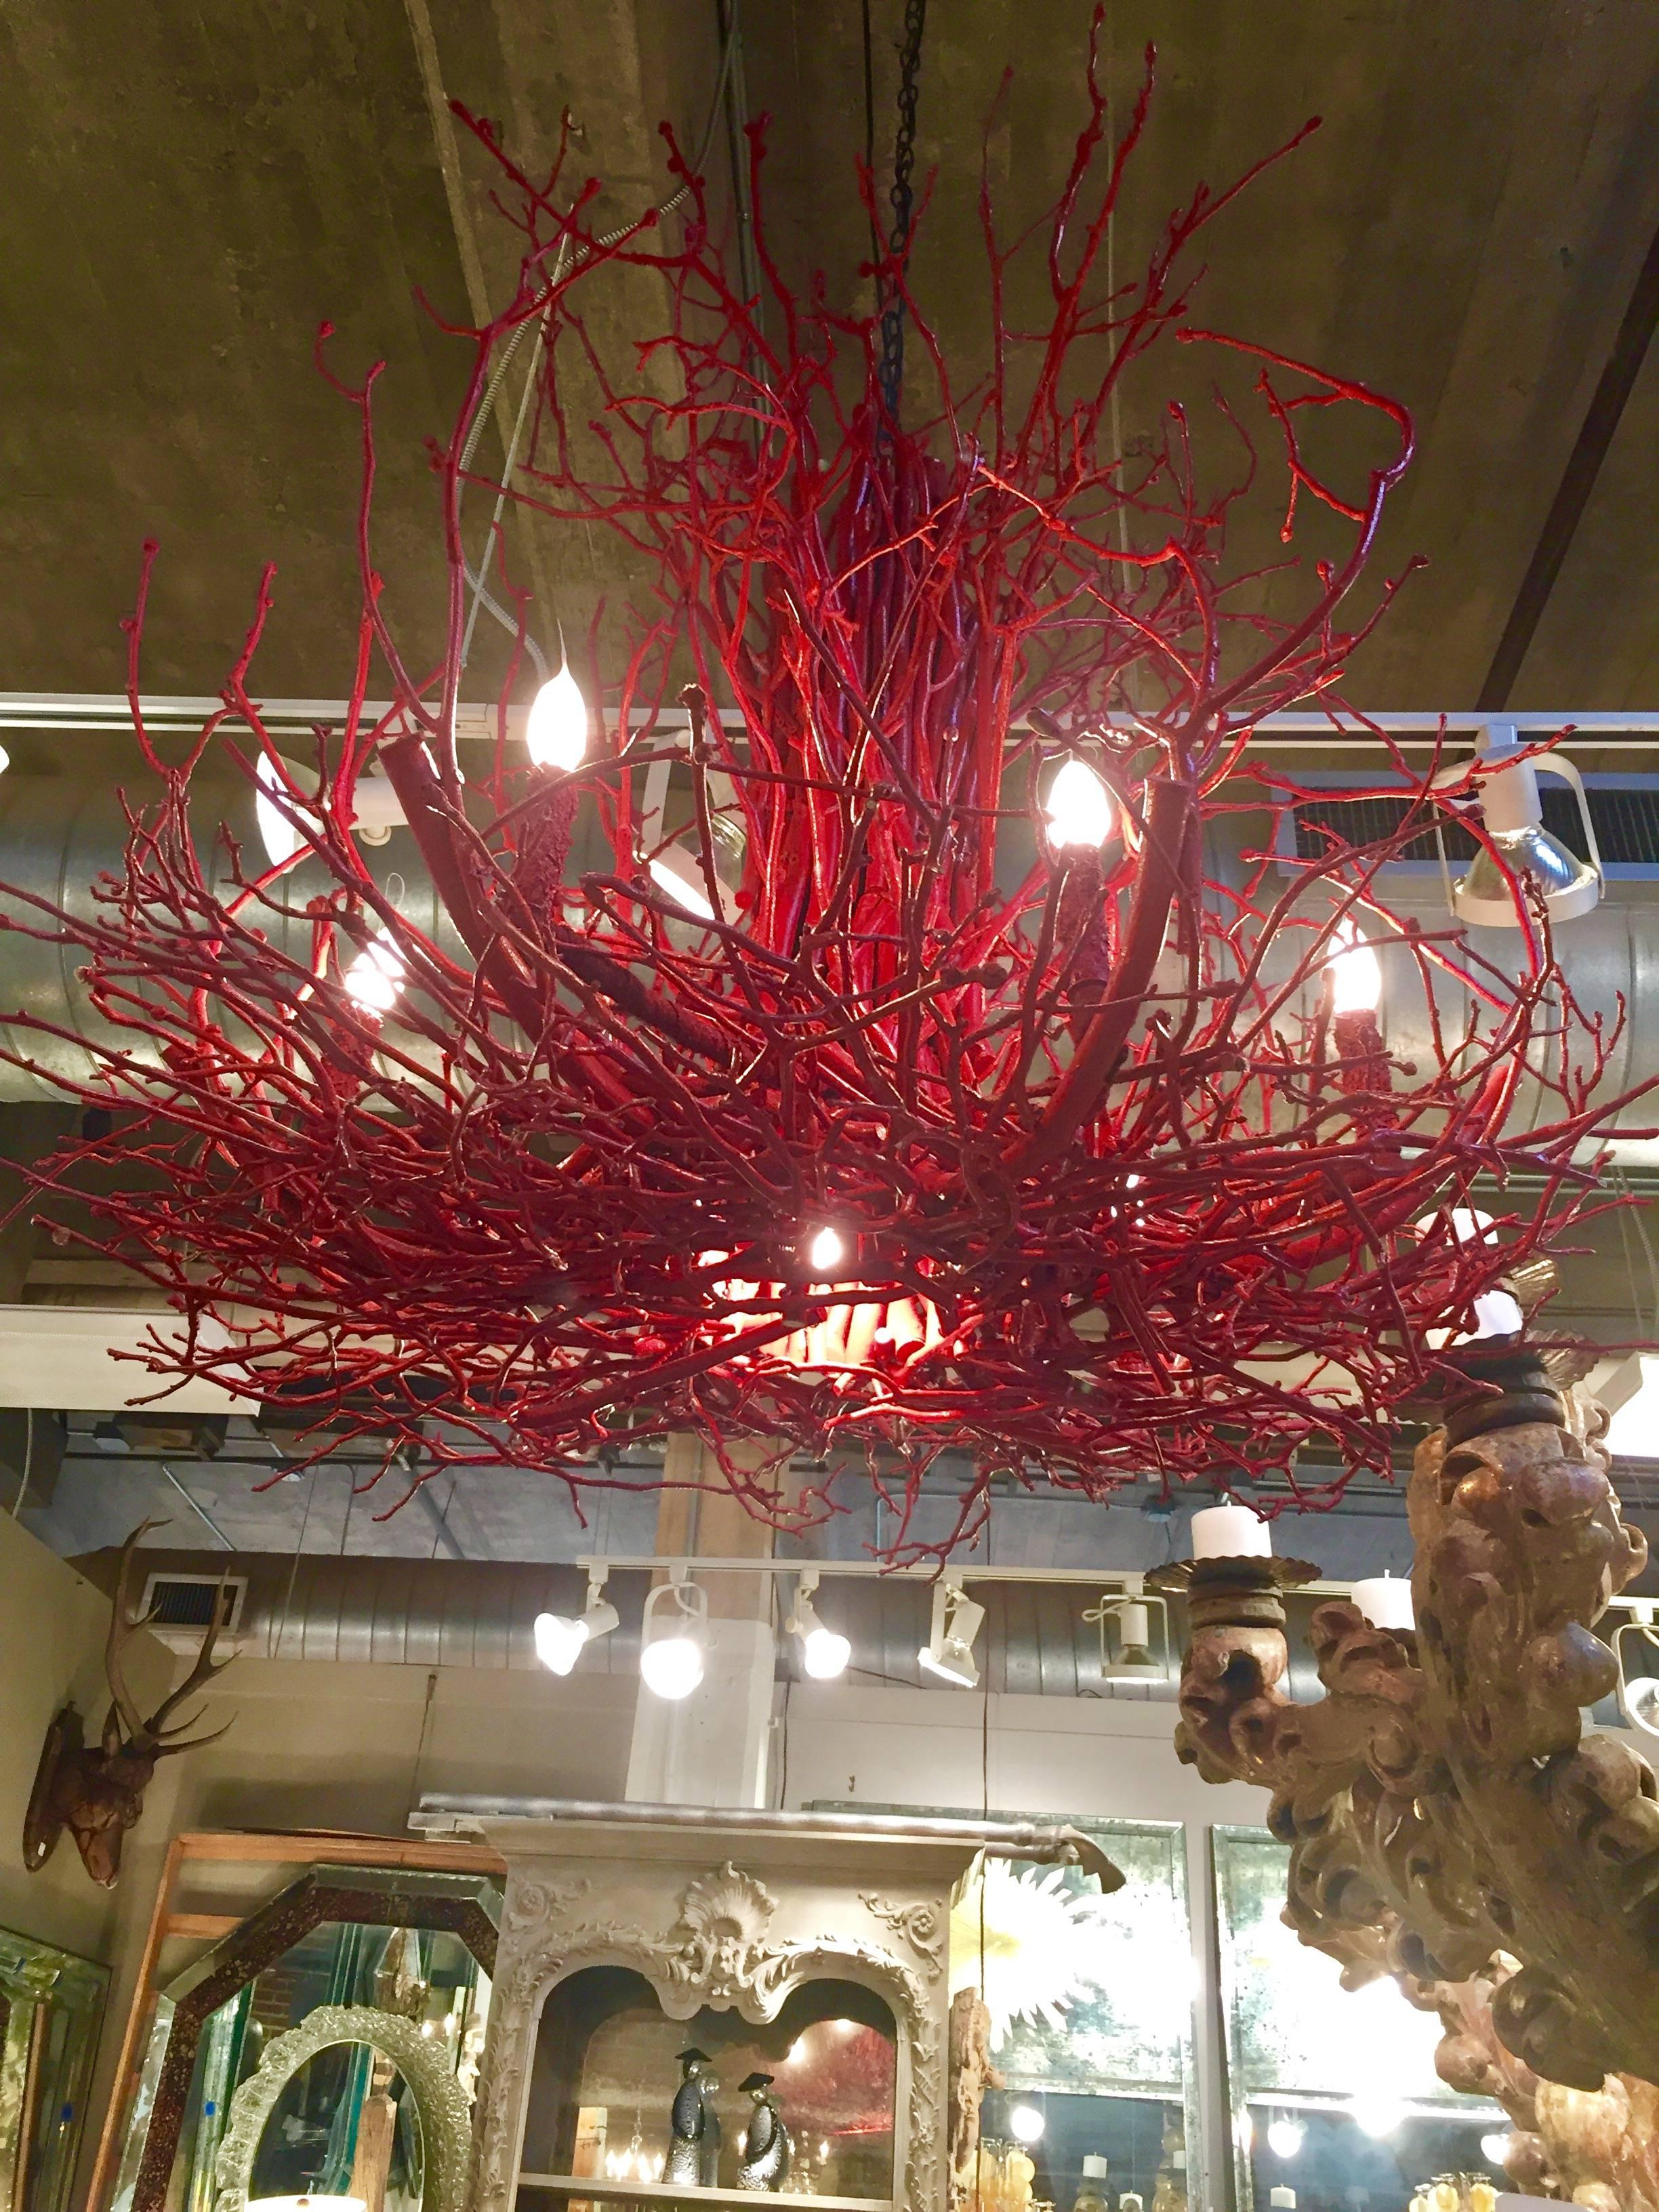 A custom chandelier of twigs painted and formed to look like coral.
Great scale and shape.